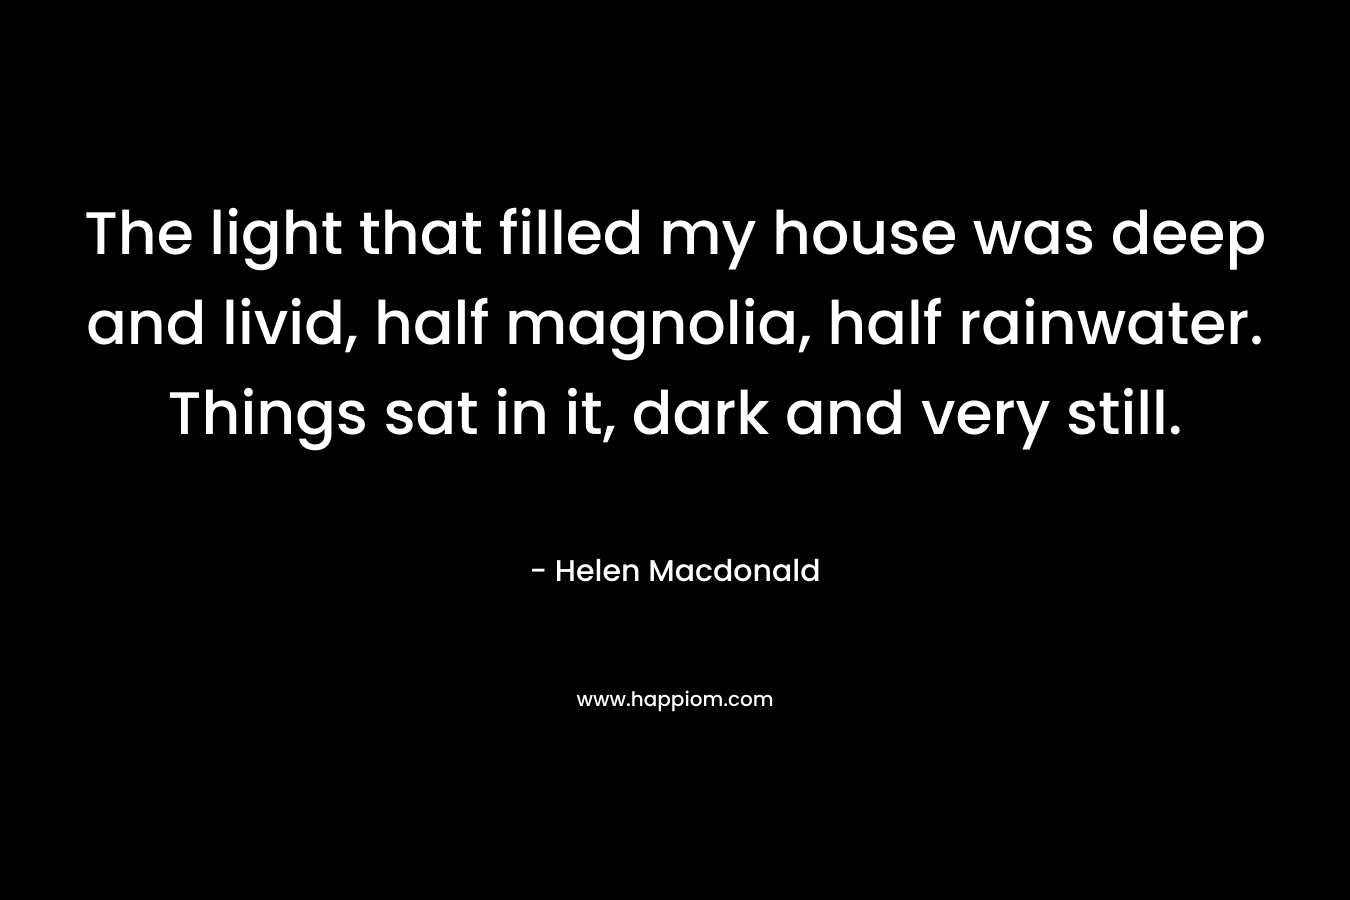 The light that filled my house was deep and livid, half magnolia, half rainwater. Things sat in it, dark and very still. – Helen Macdonald